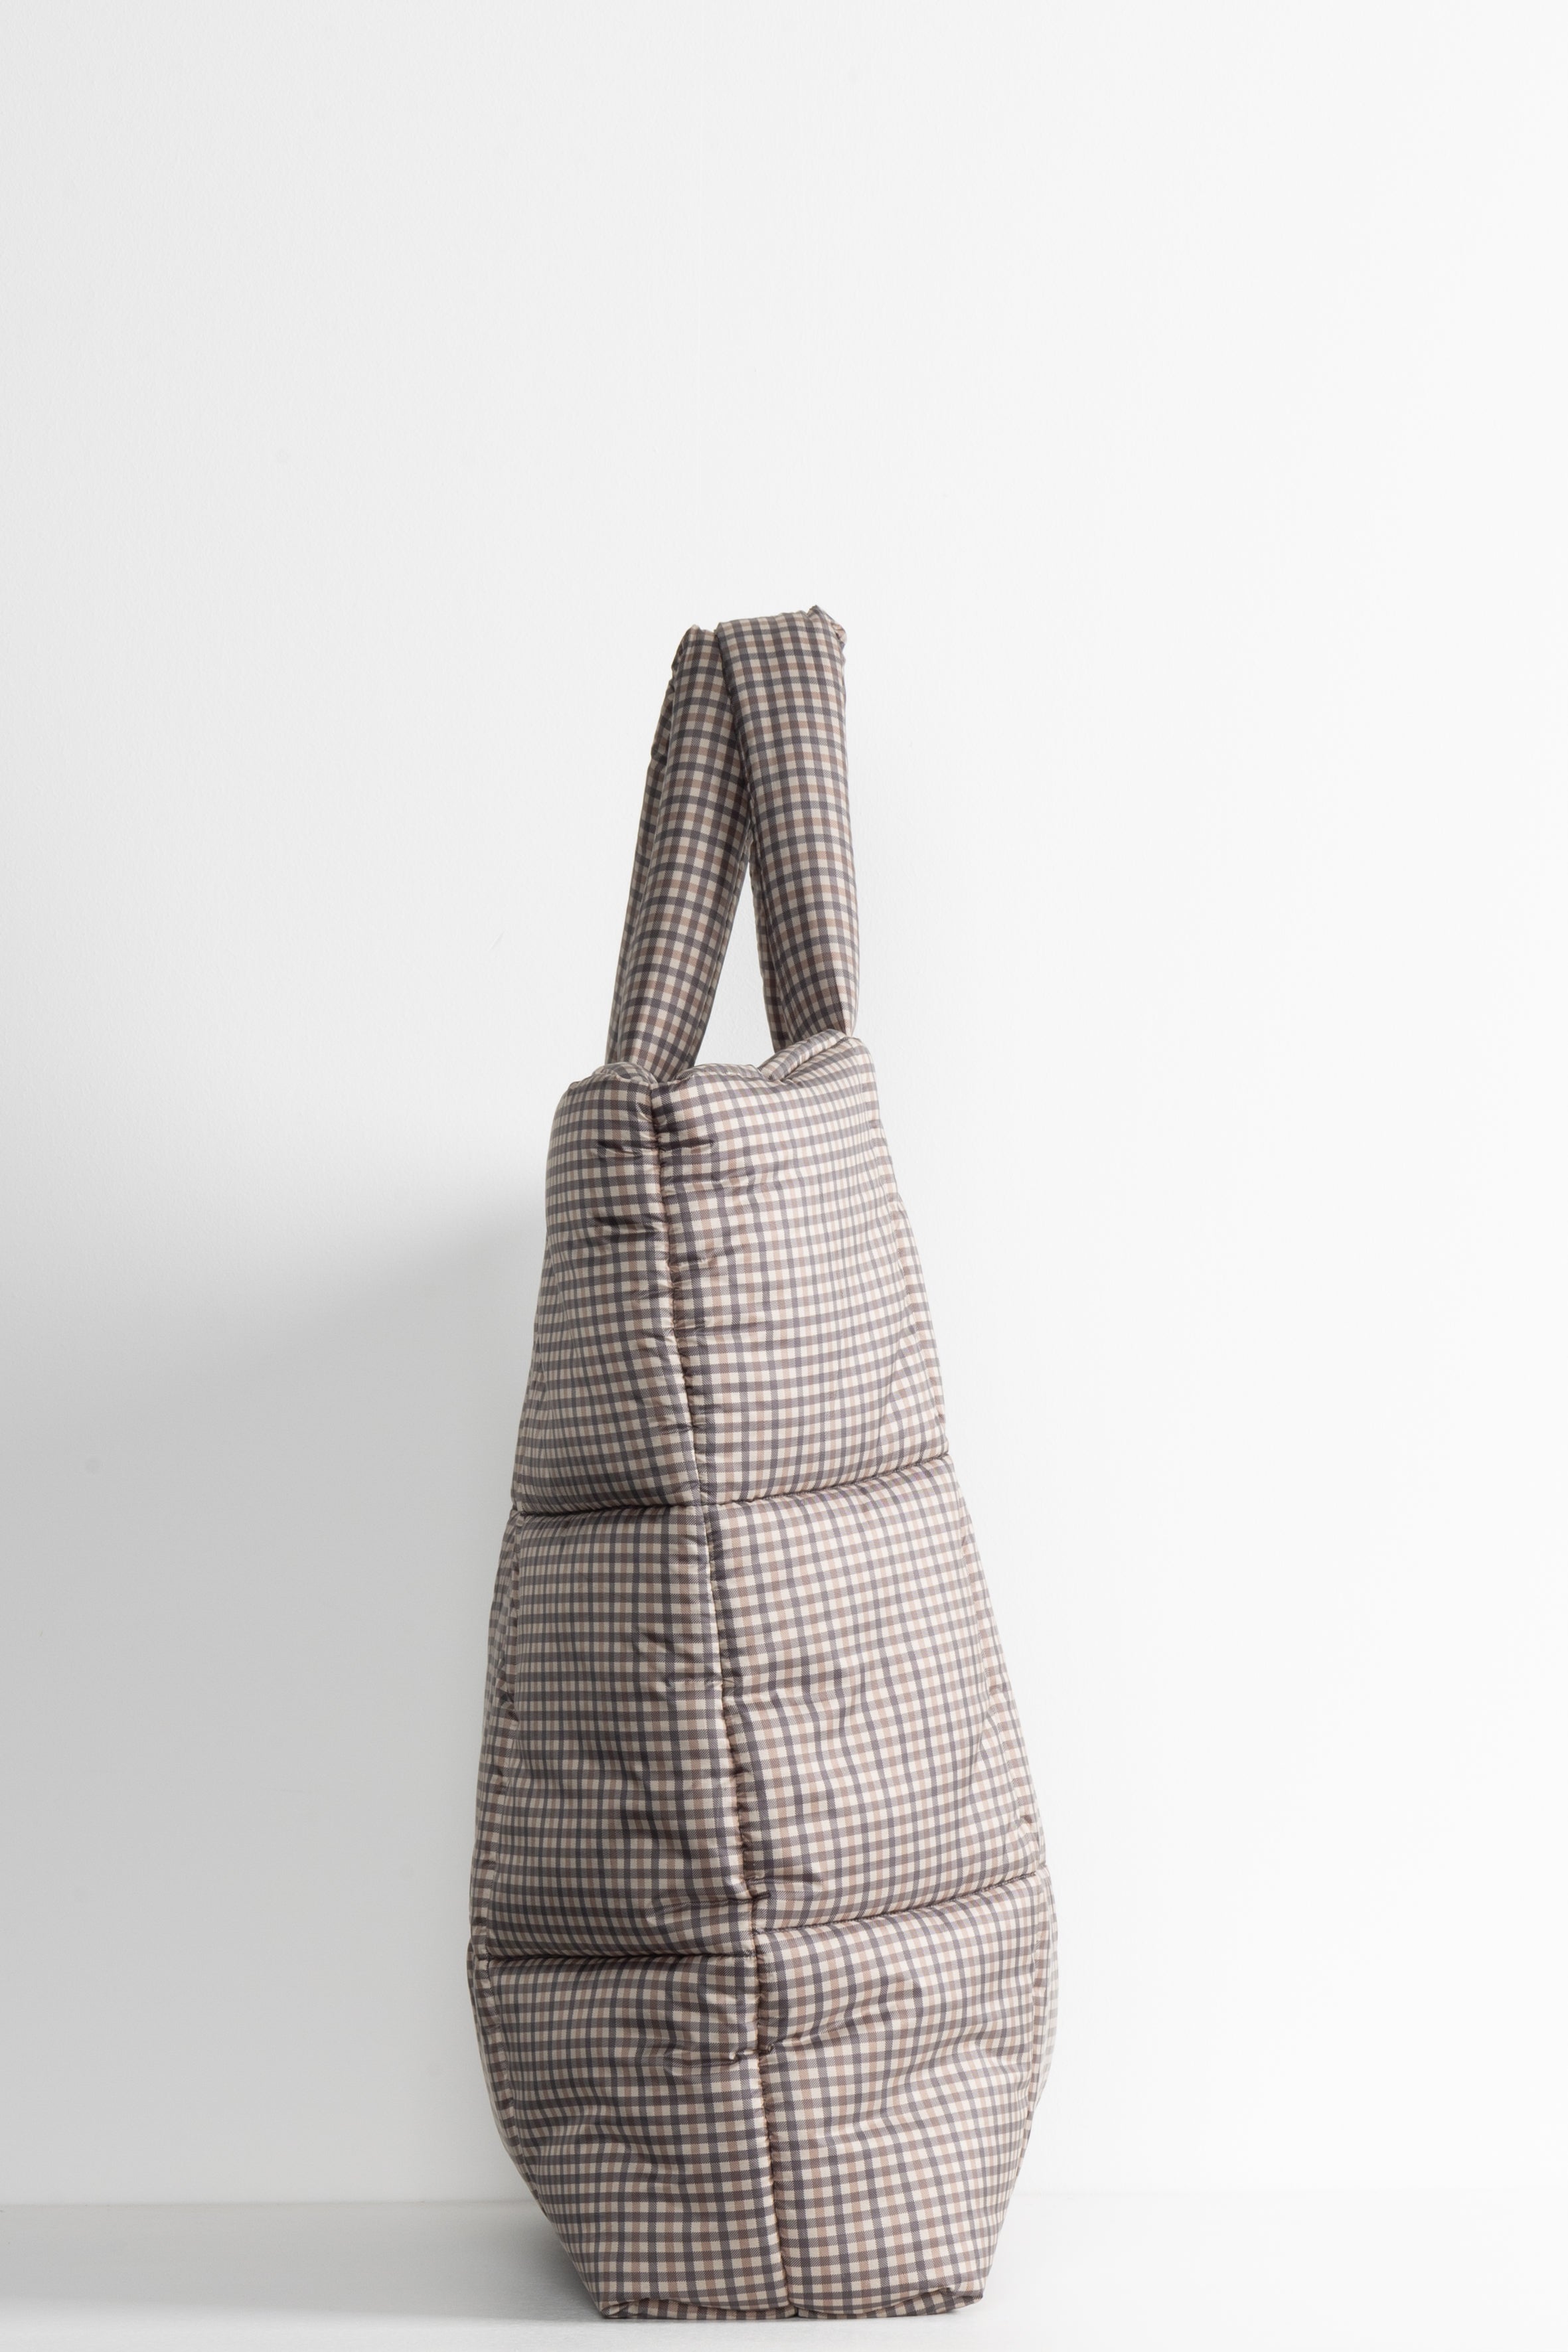 oversized Lempelius Pufferbag with check print